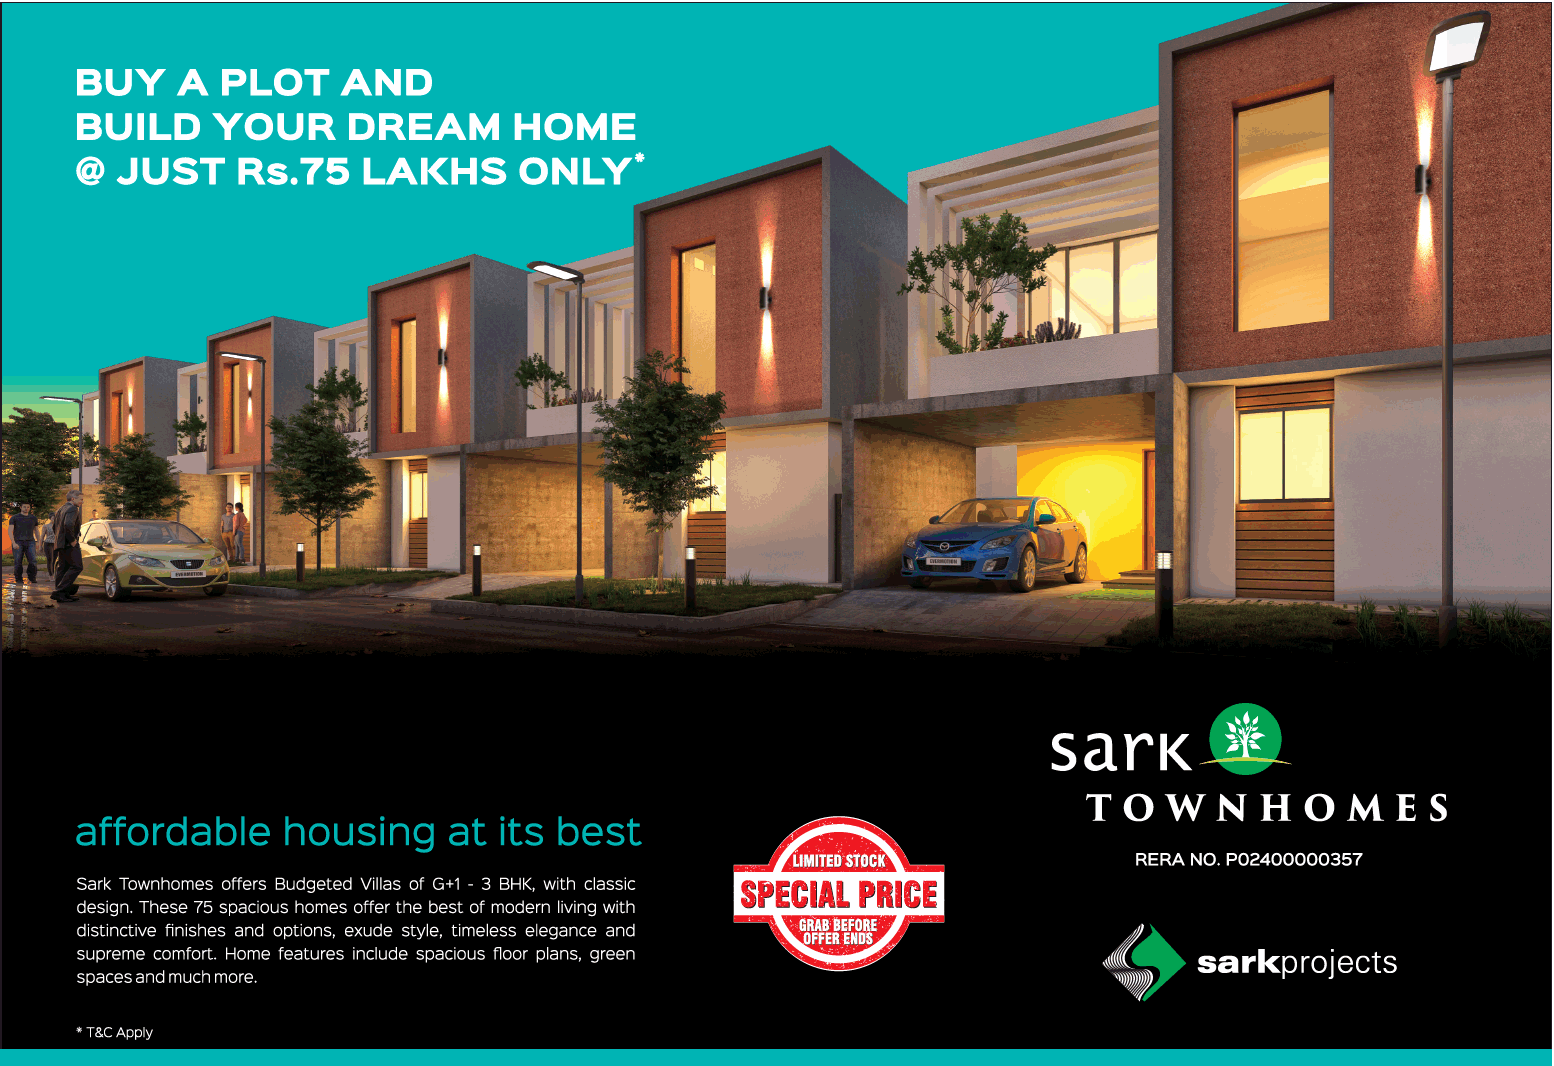 Buy a plot and build your dream home in just Rs 75 Lakh only at Sark Green Residences in Hyderabad